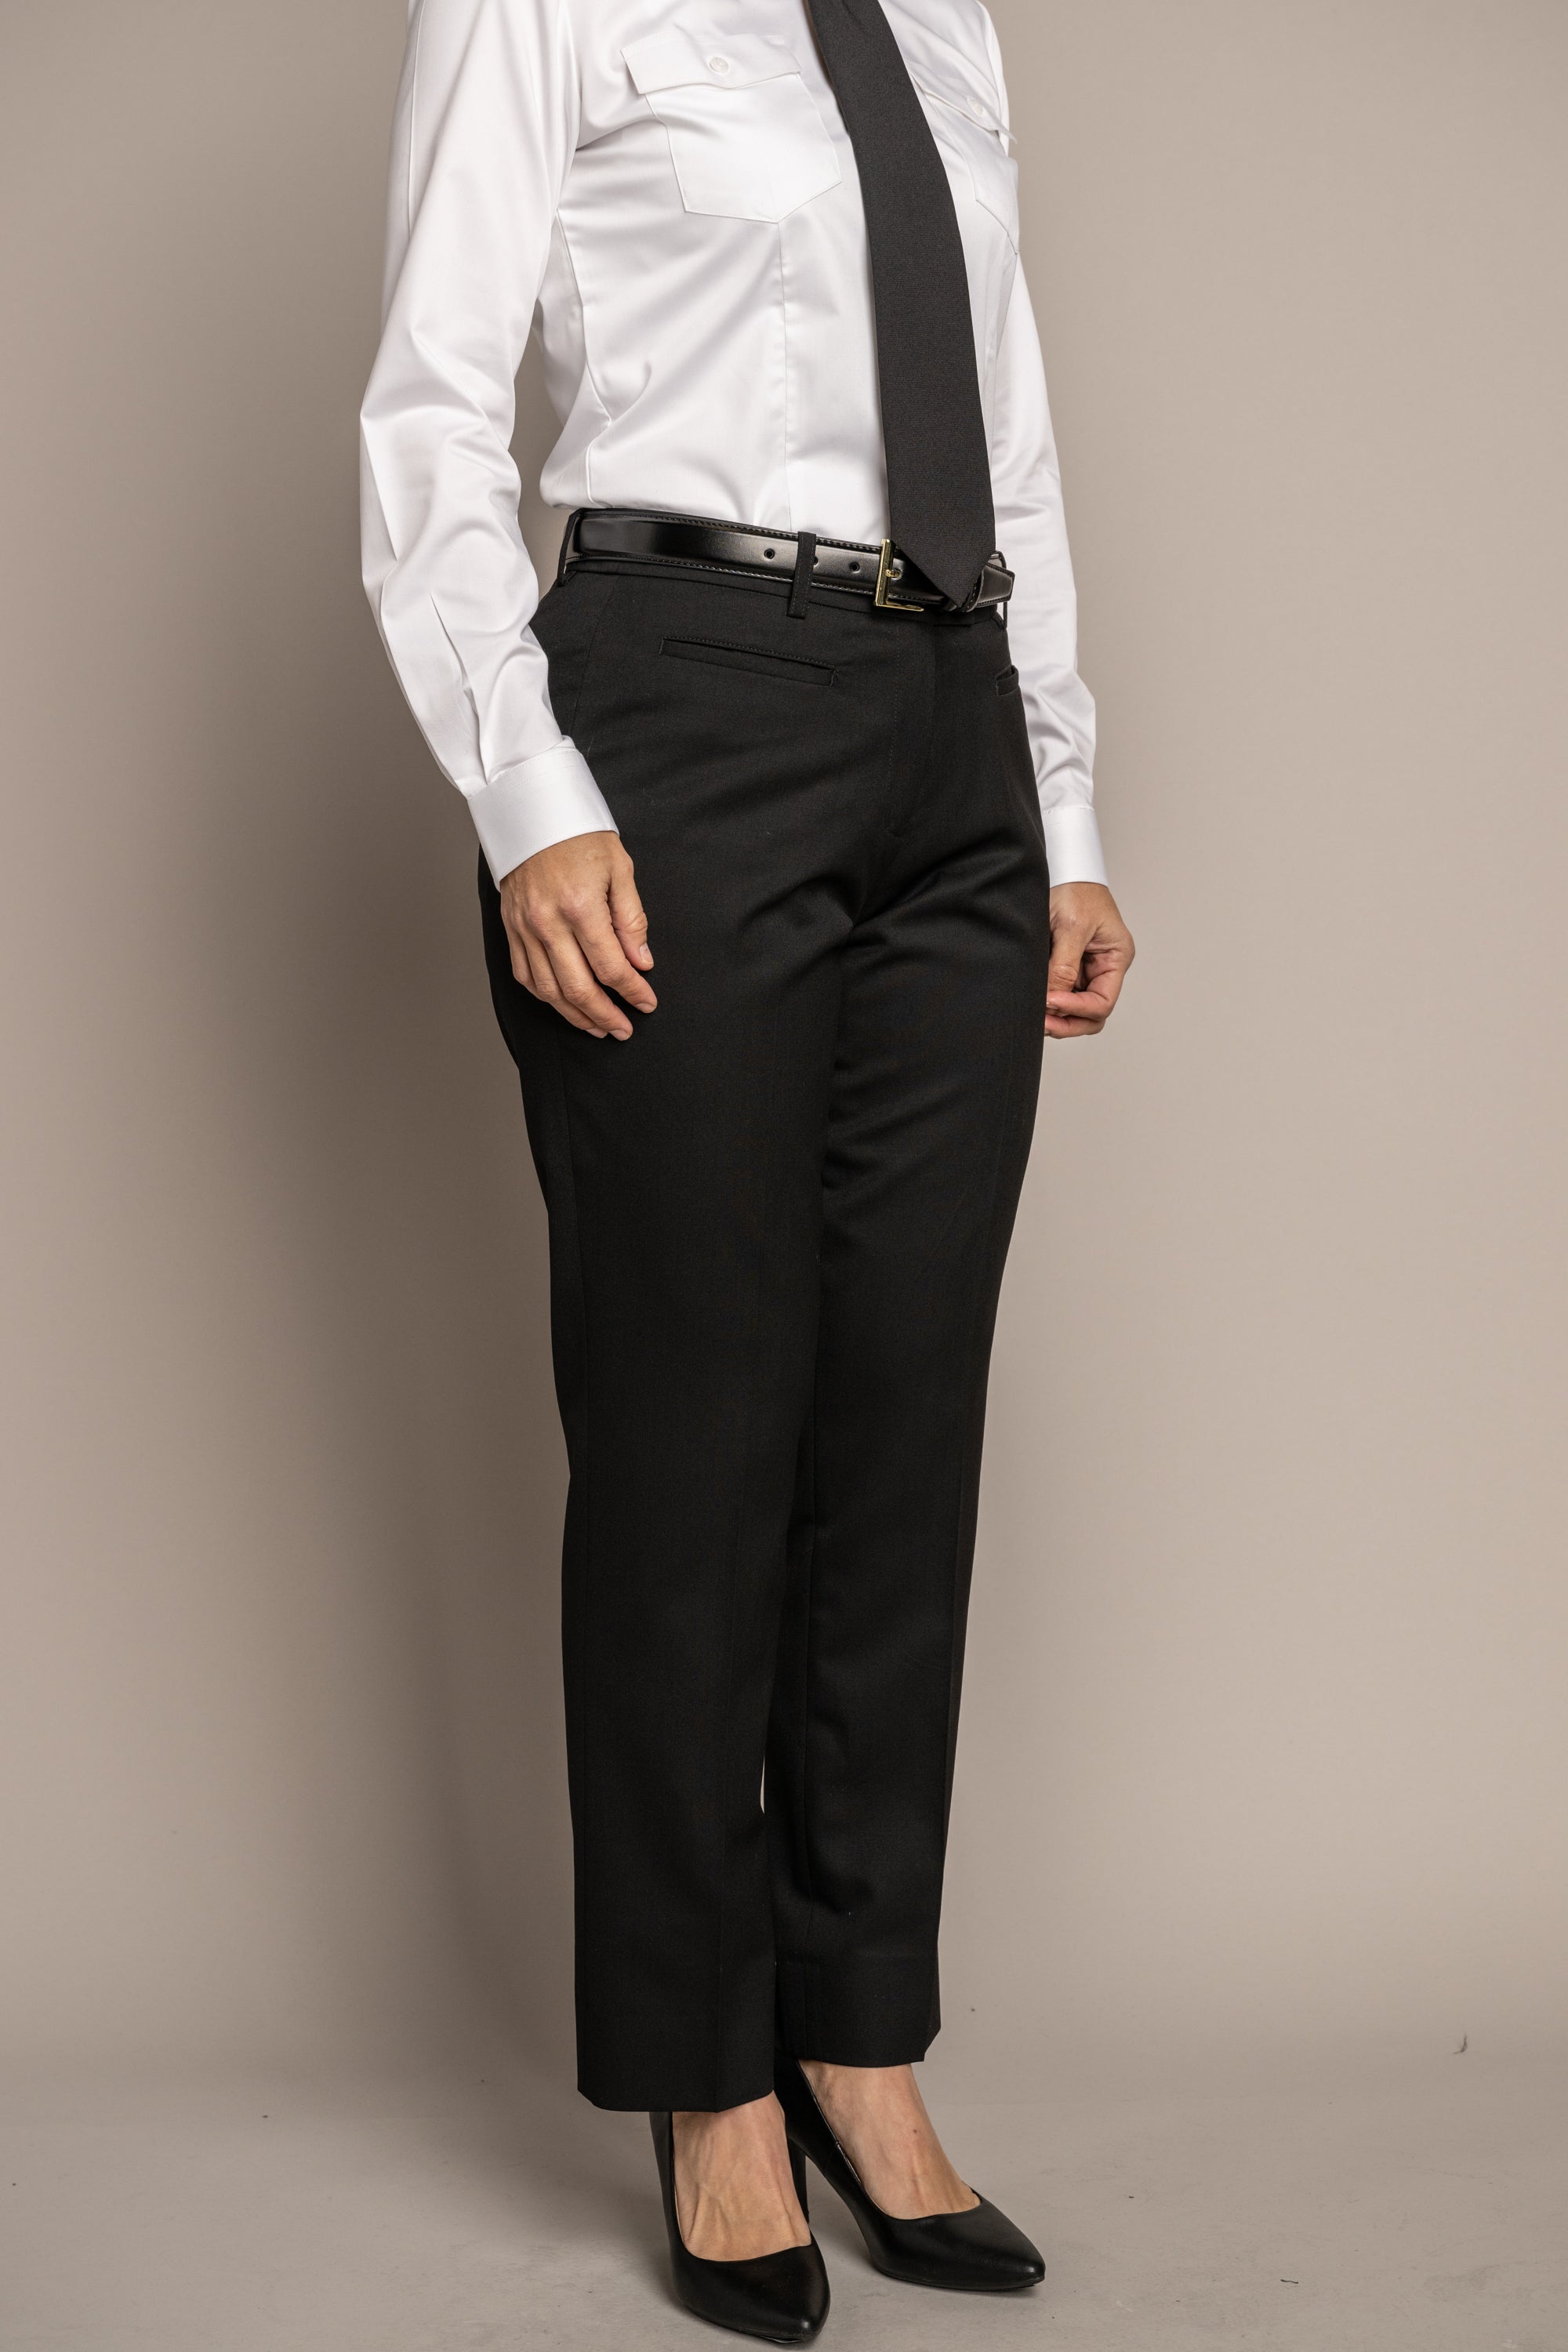 Blue and Black Formal Trousers | Intermod Workwear